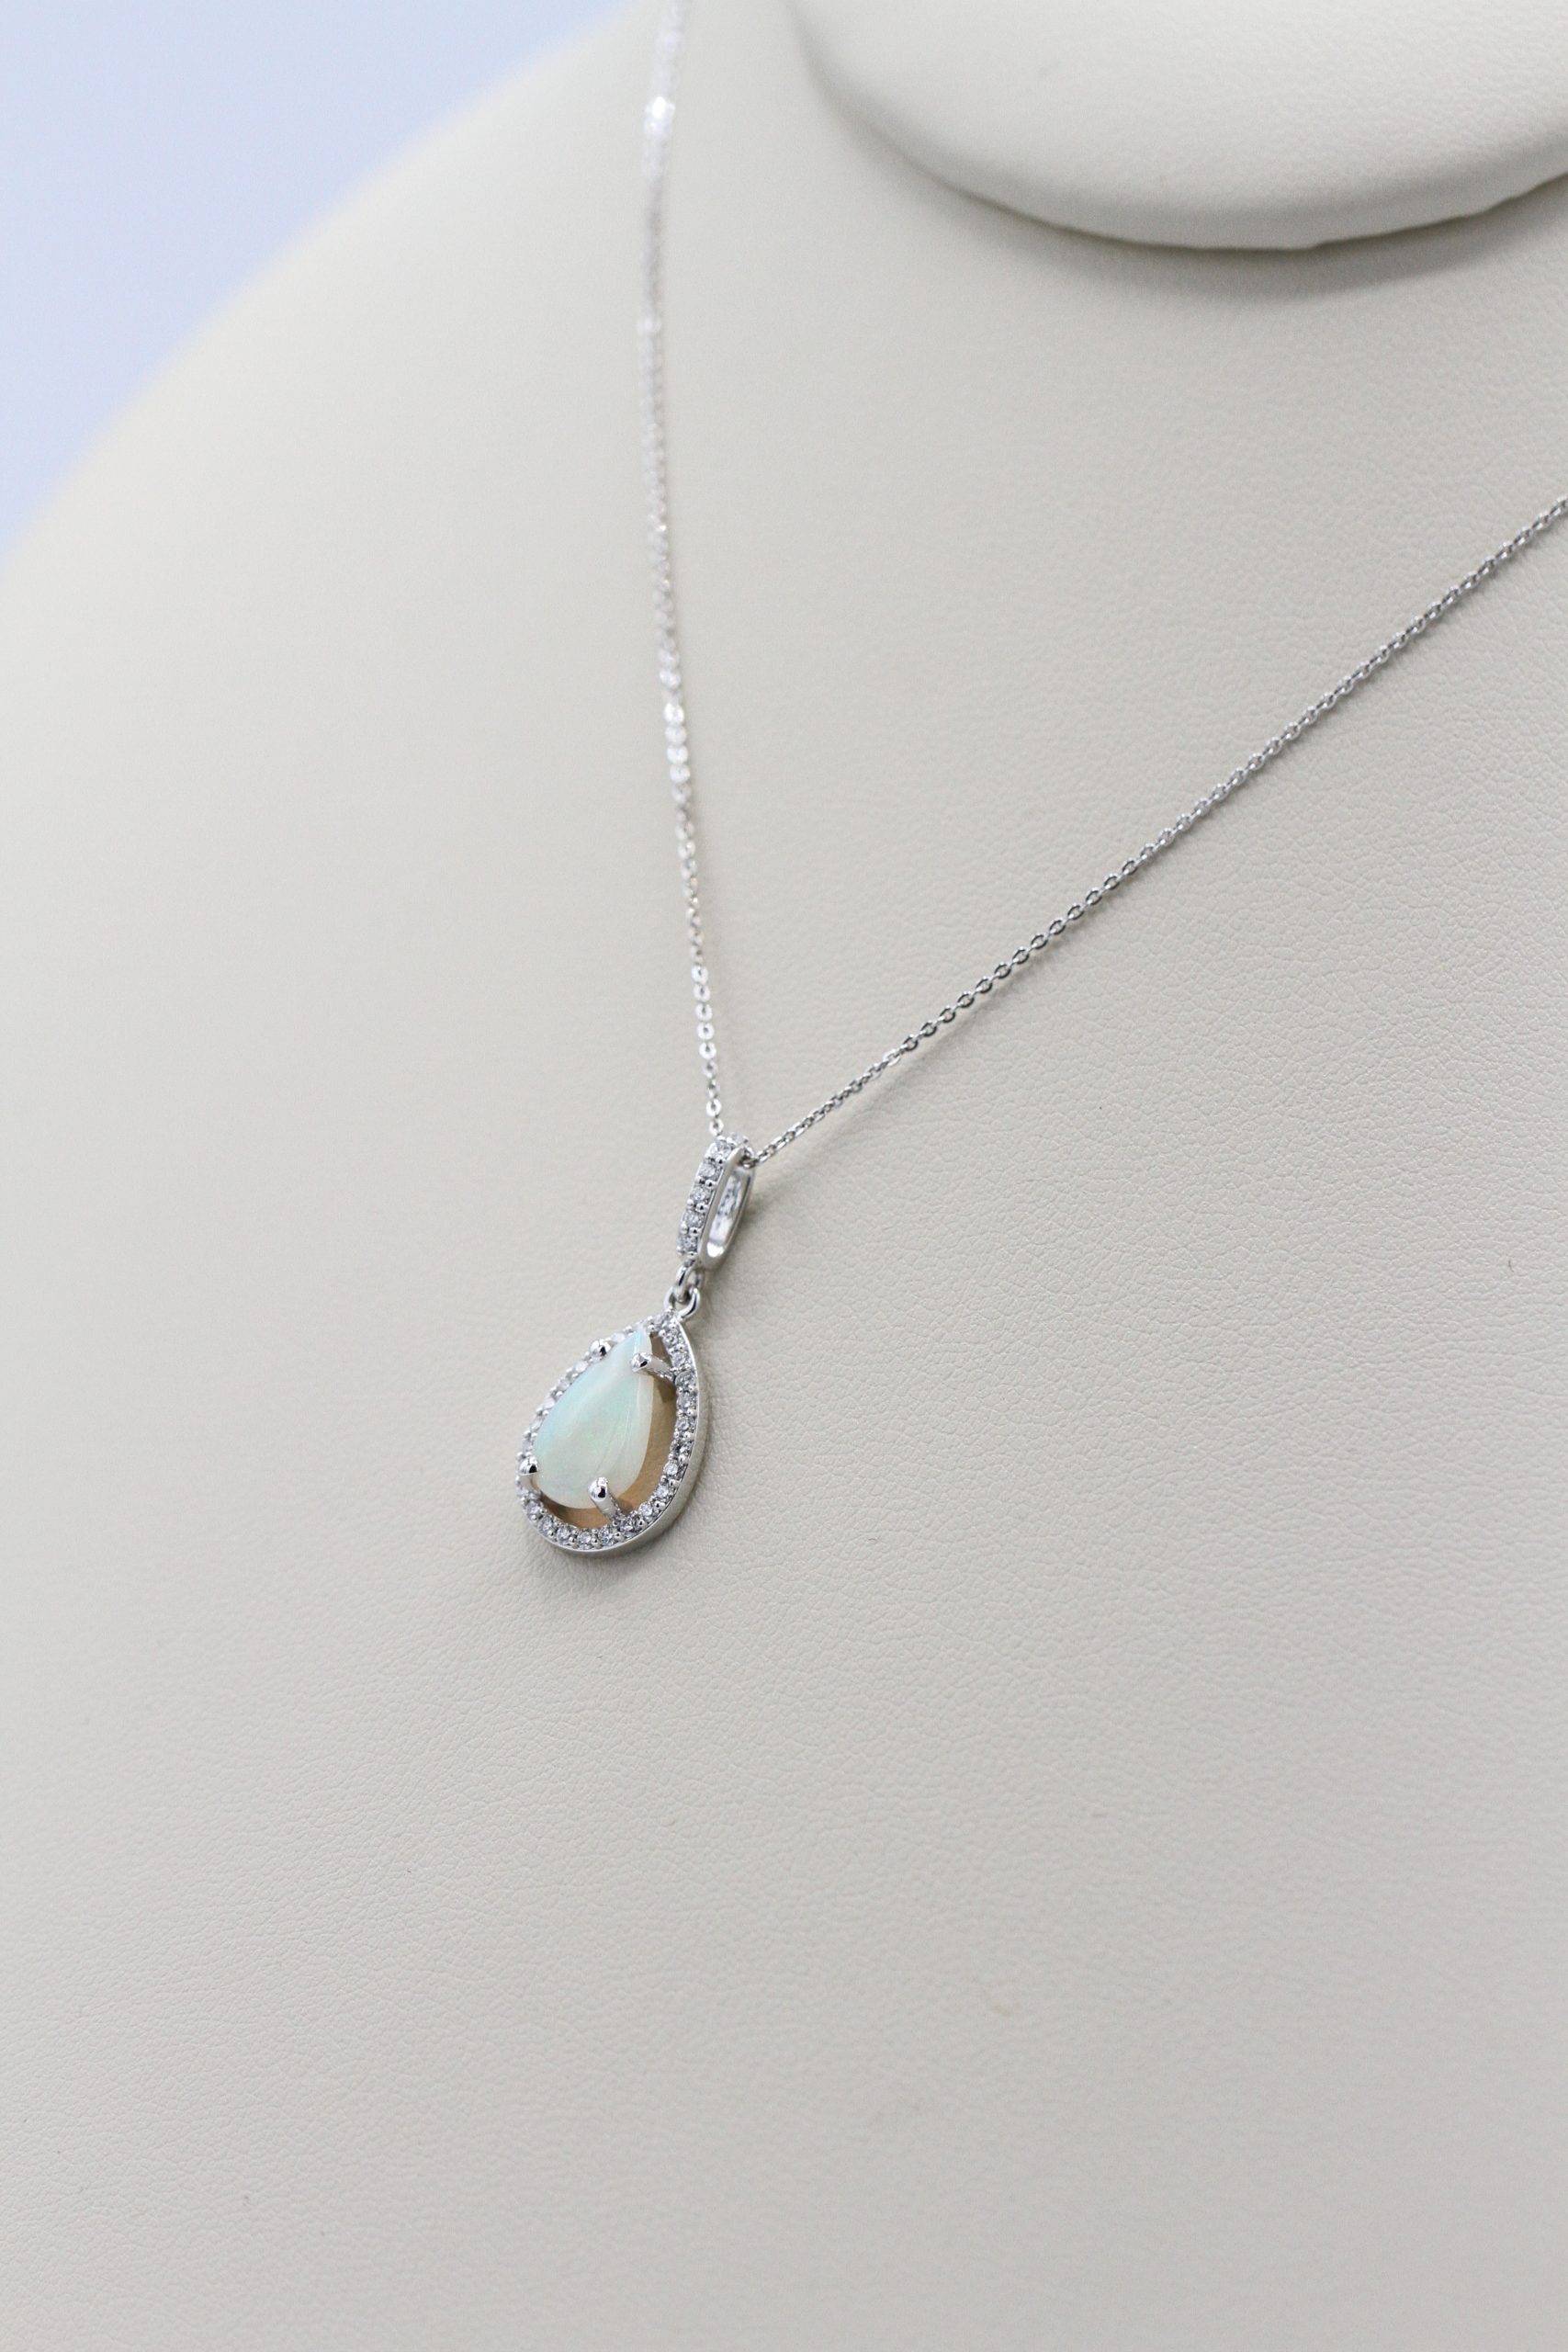 A necklace with teardrop-shaped gemstone